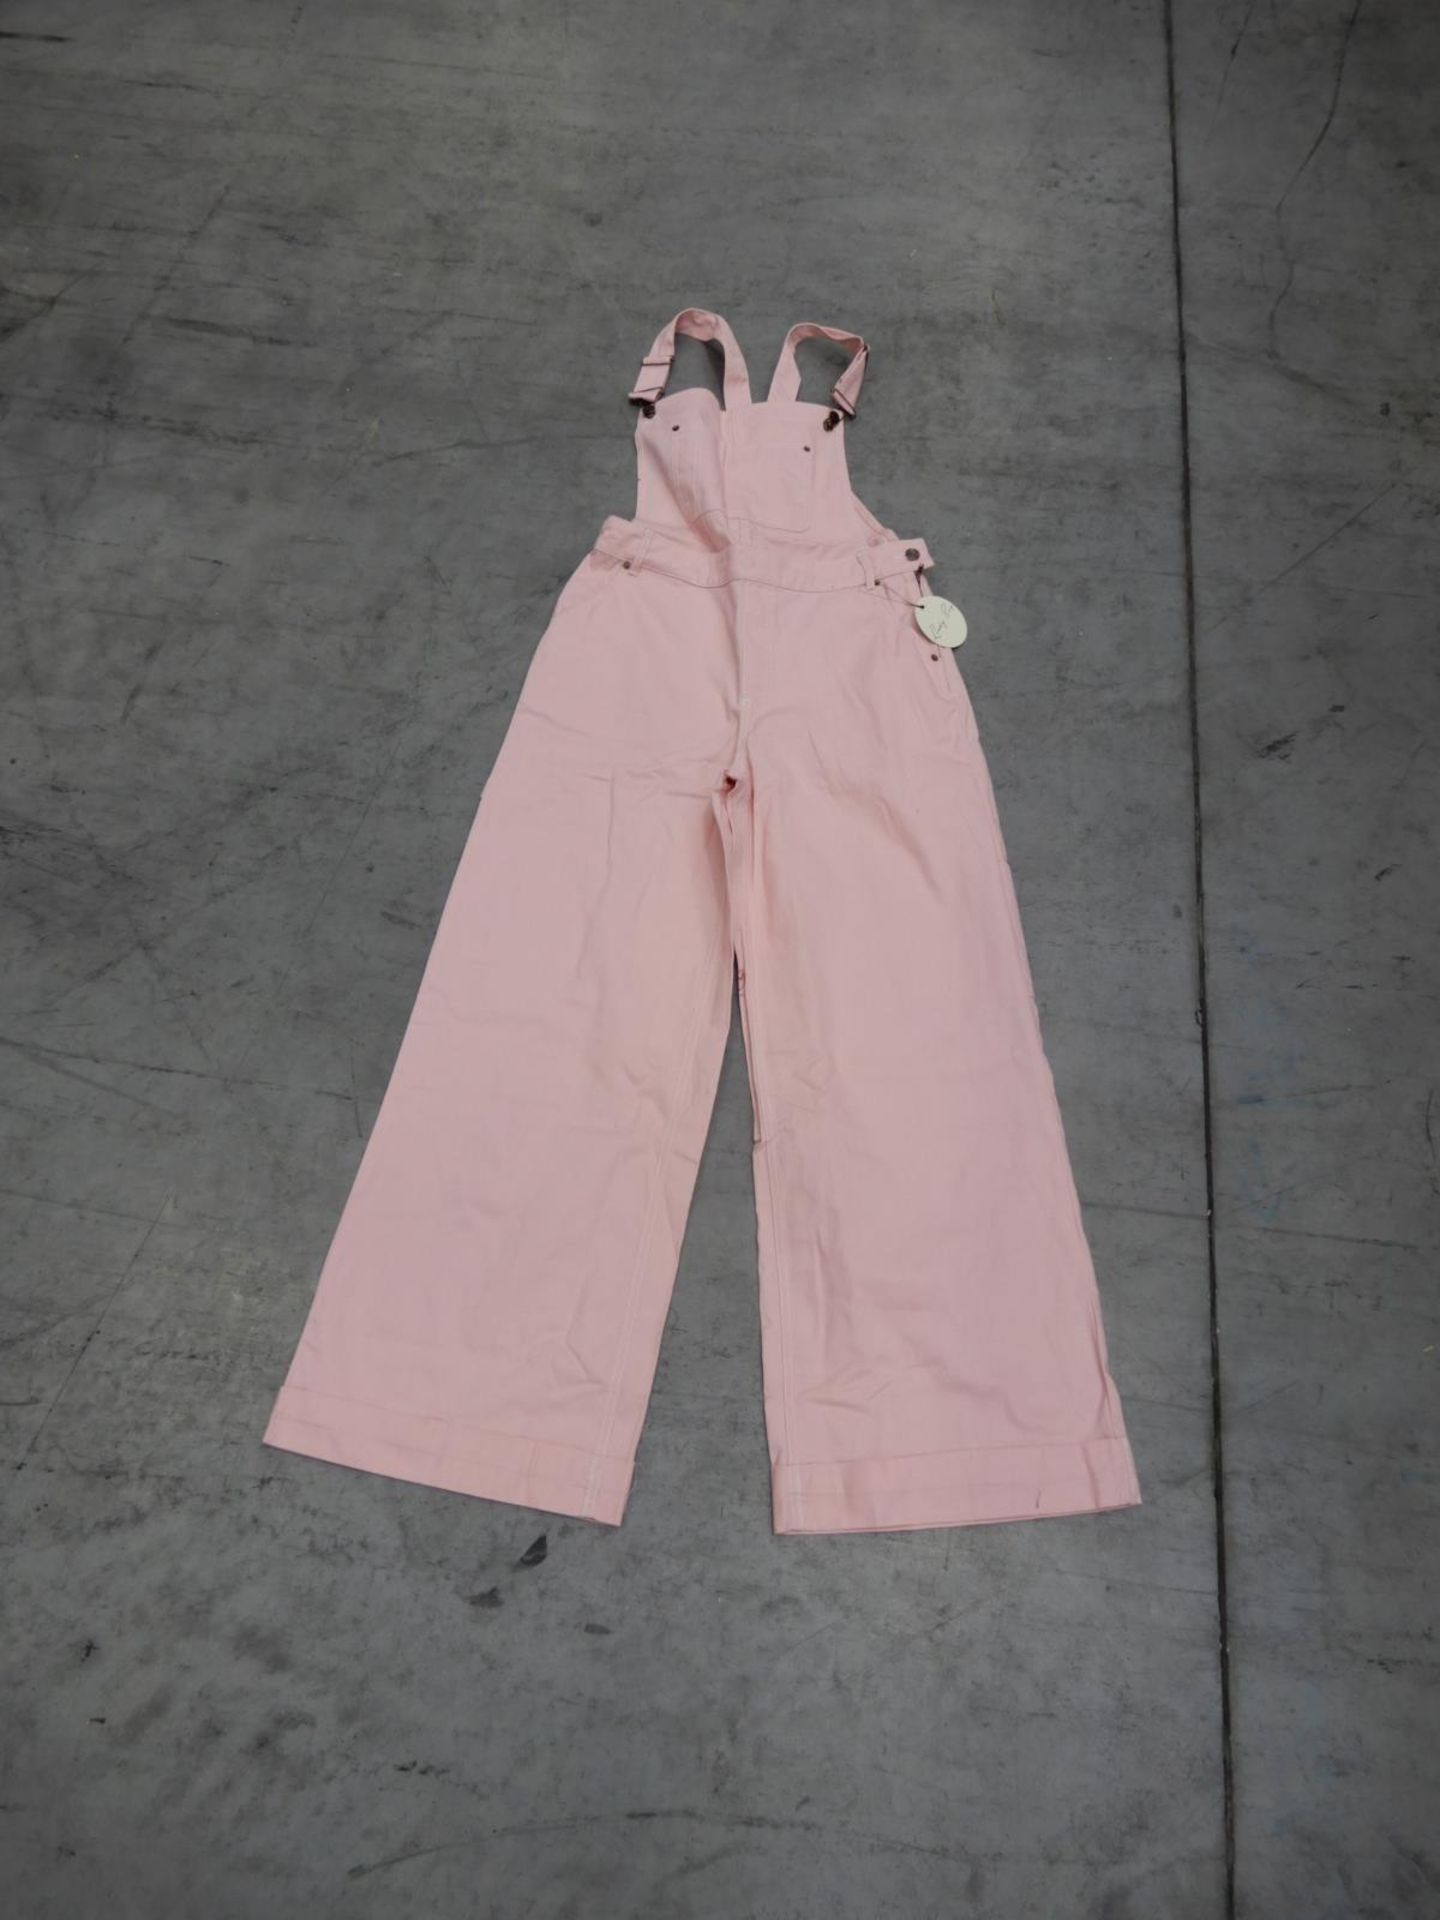 *13 Lindy Bop Leigh Pink Dungarees Size: 16